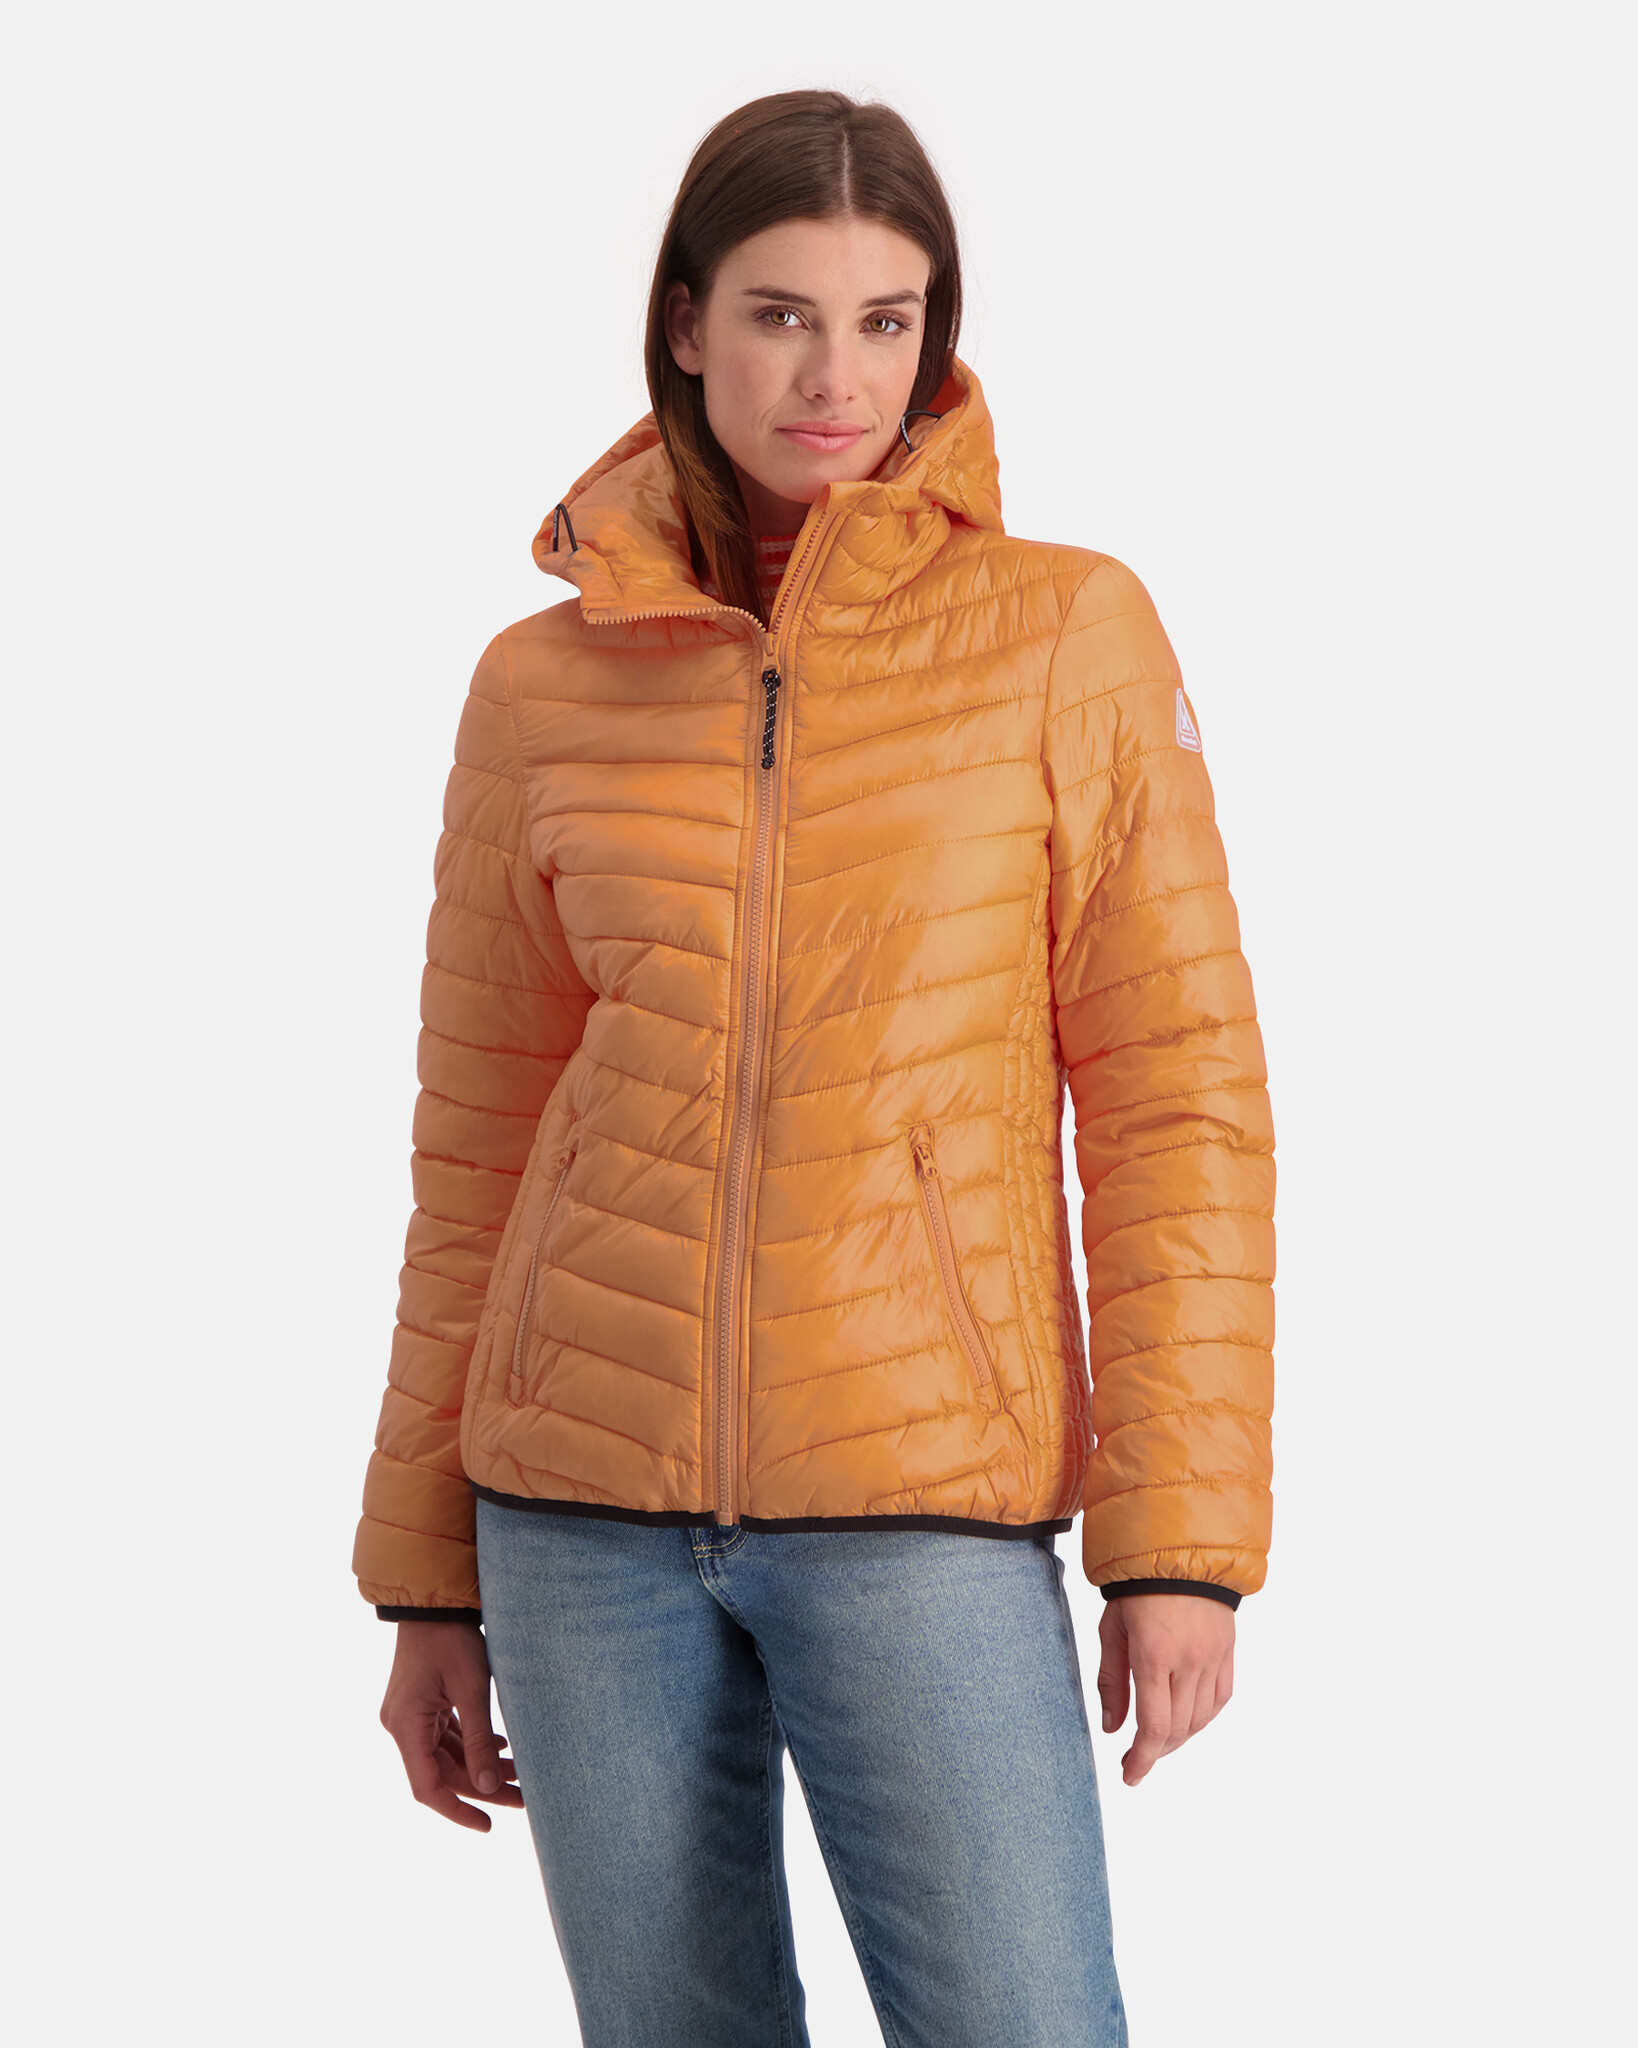 Womens Lightweight, water repellent puffer jacket with 100% recycled fabric and REPREVE®  filling